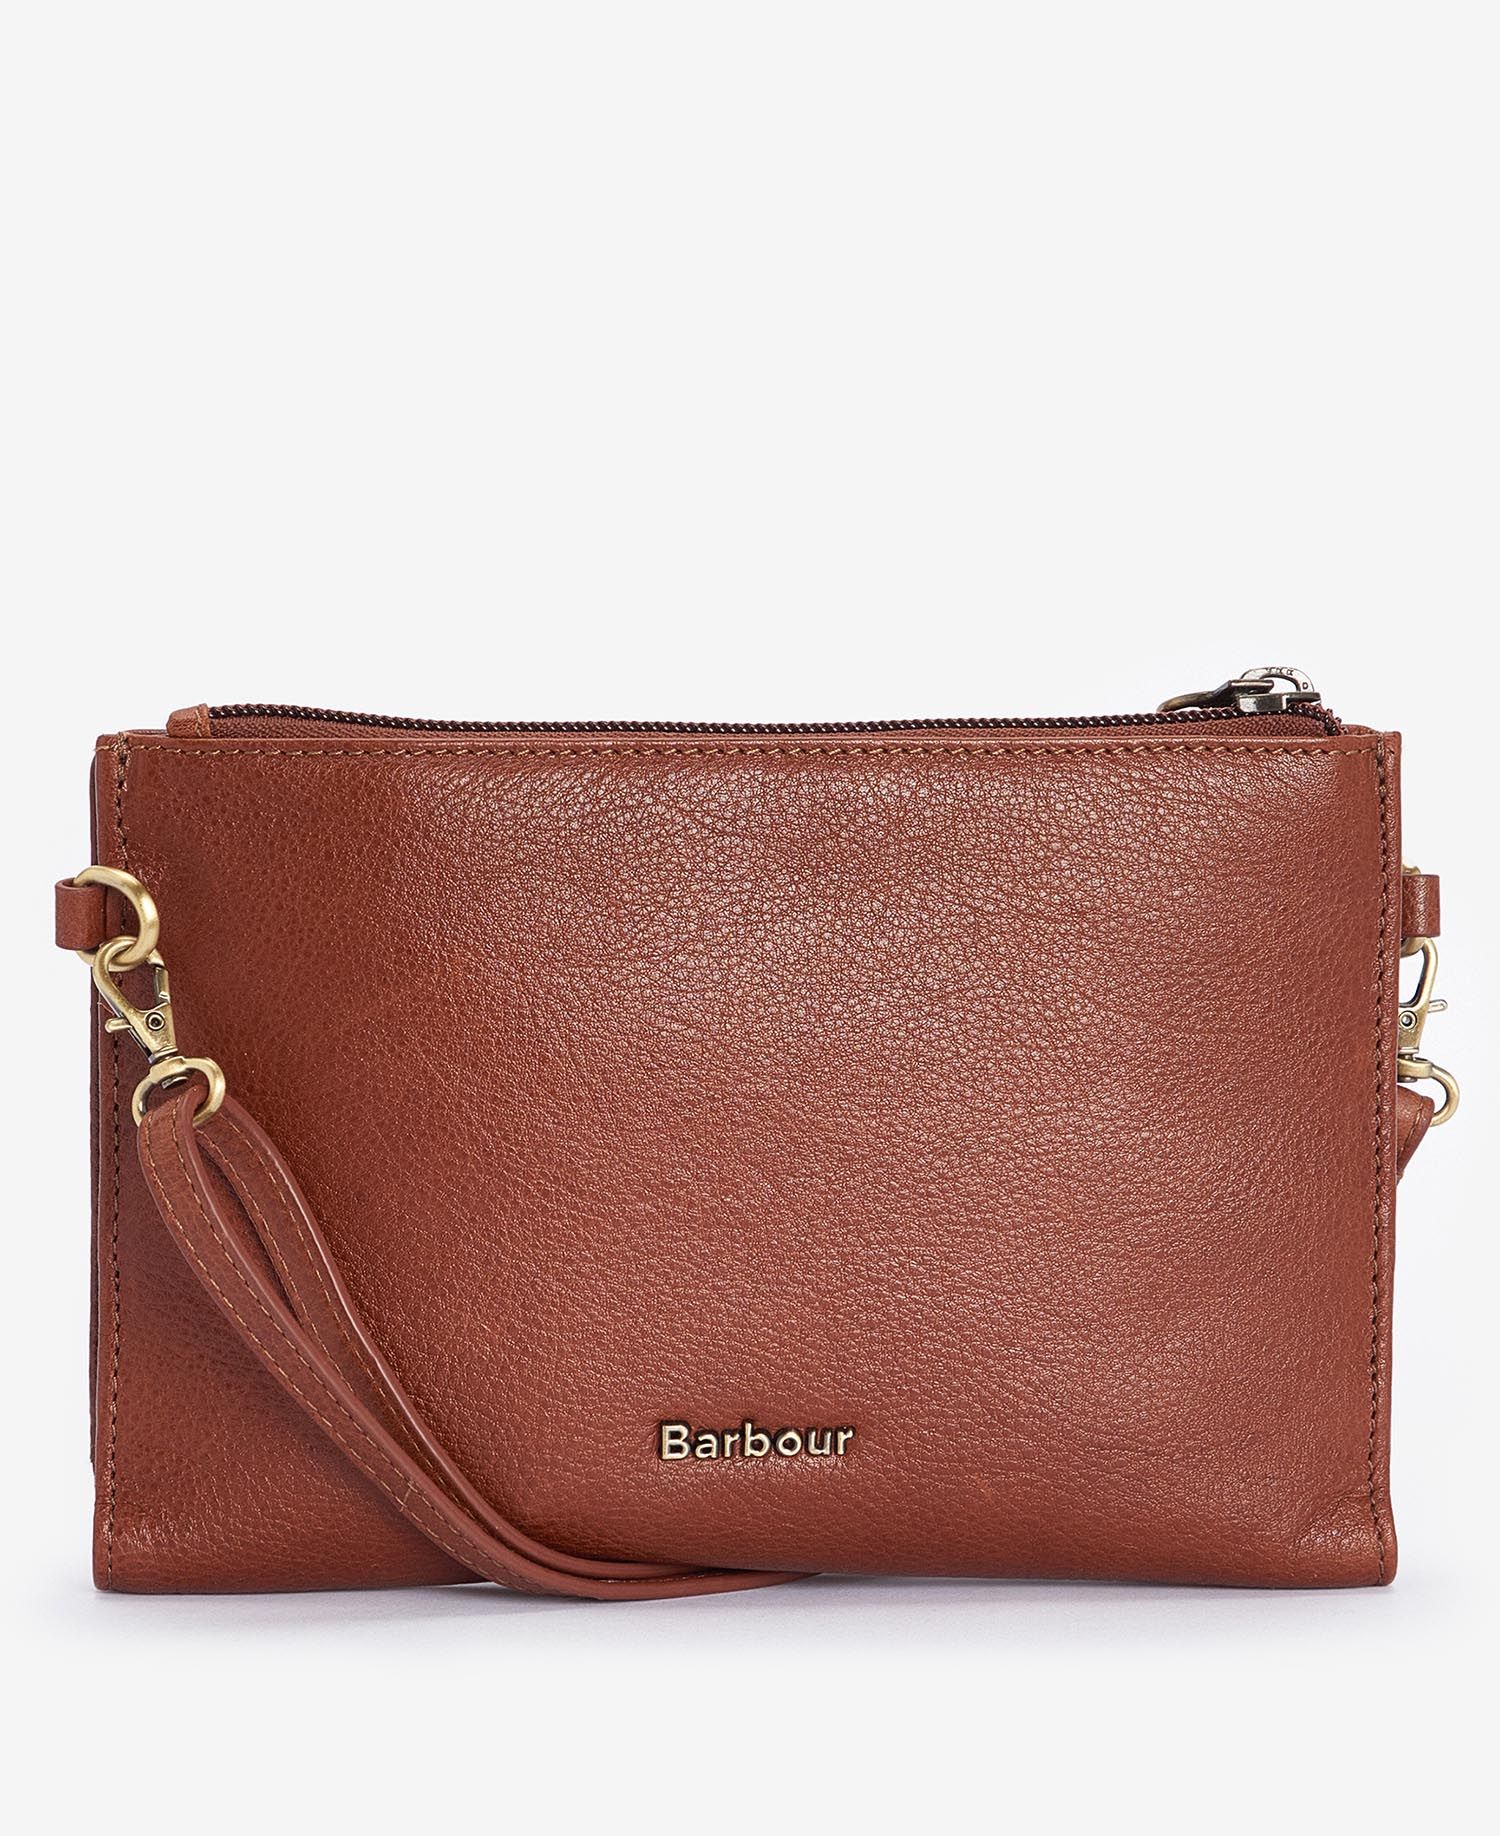 Barbour Laire Travel Purse/Document Holder - Brown